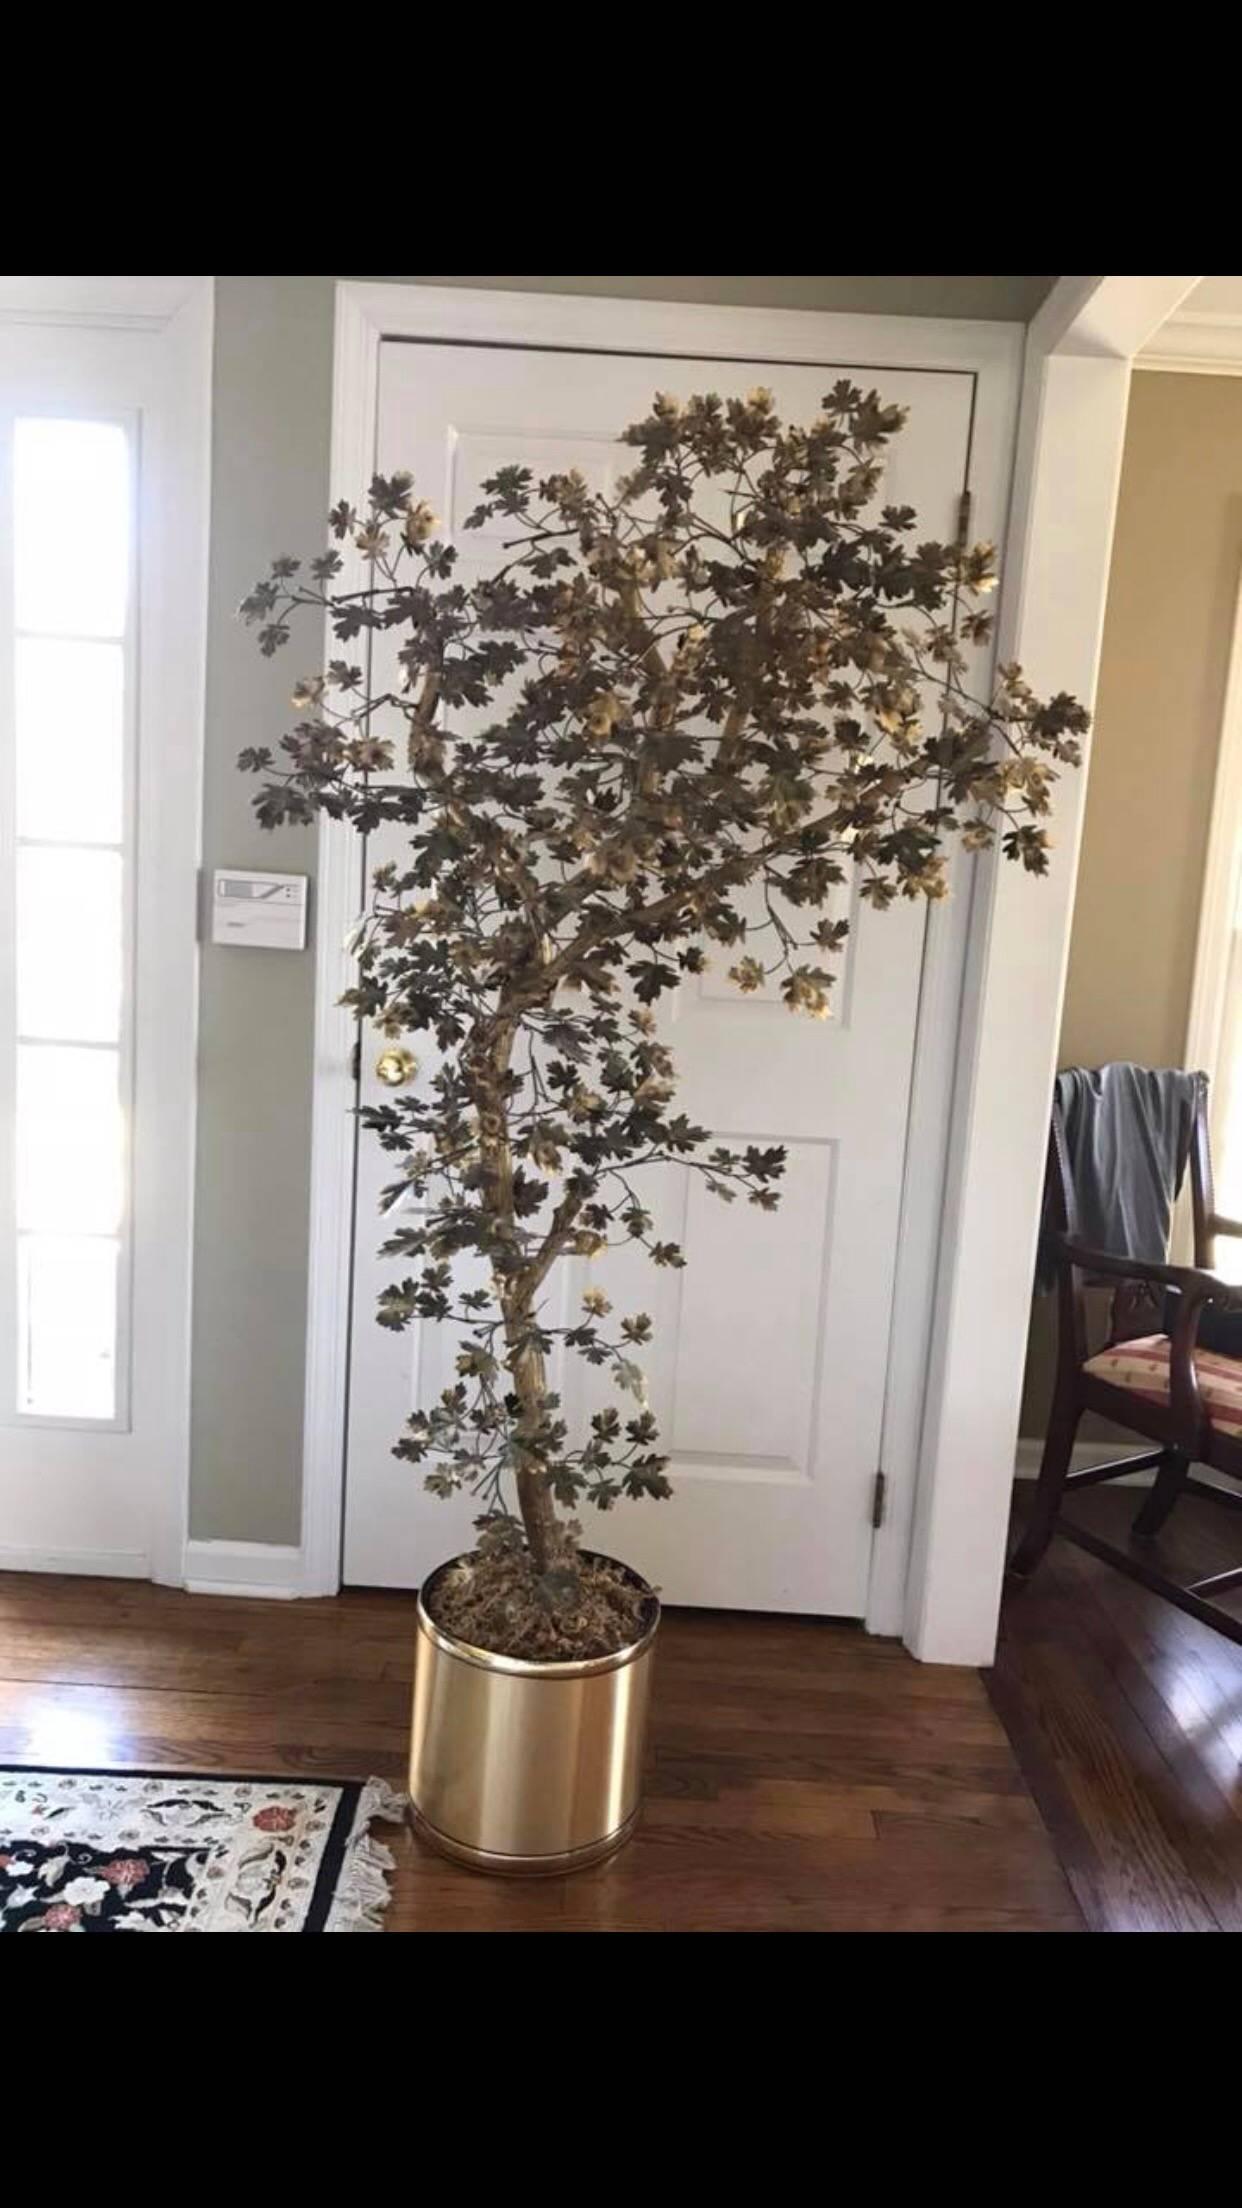 Midcentury metallic tree attributed to Curtis Jere. Brass basket or planter with real gilded tree branches and brass mixed metal maple shaped leaves. Strong and sturdy. Would be a great accent piece in any room. Bring nature indoors! No detectable